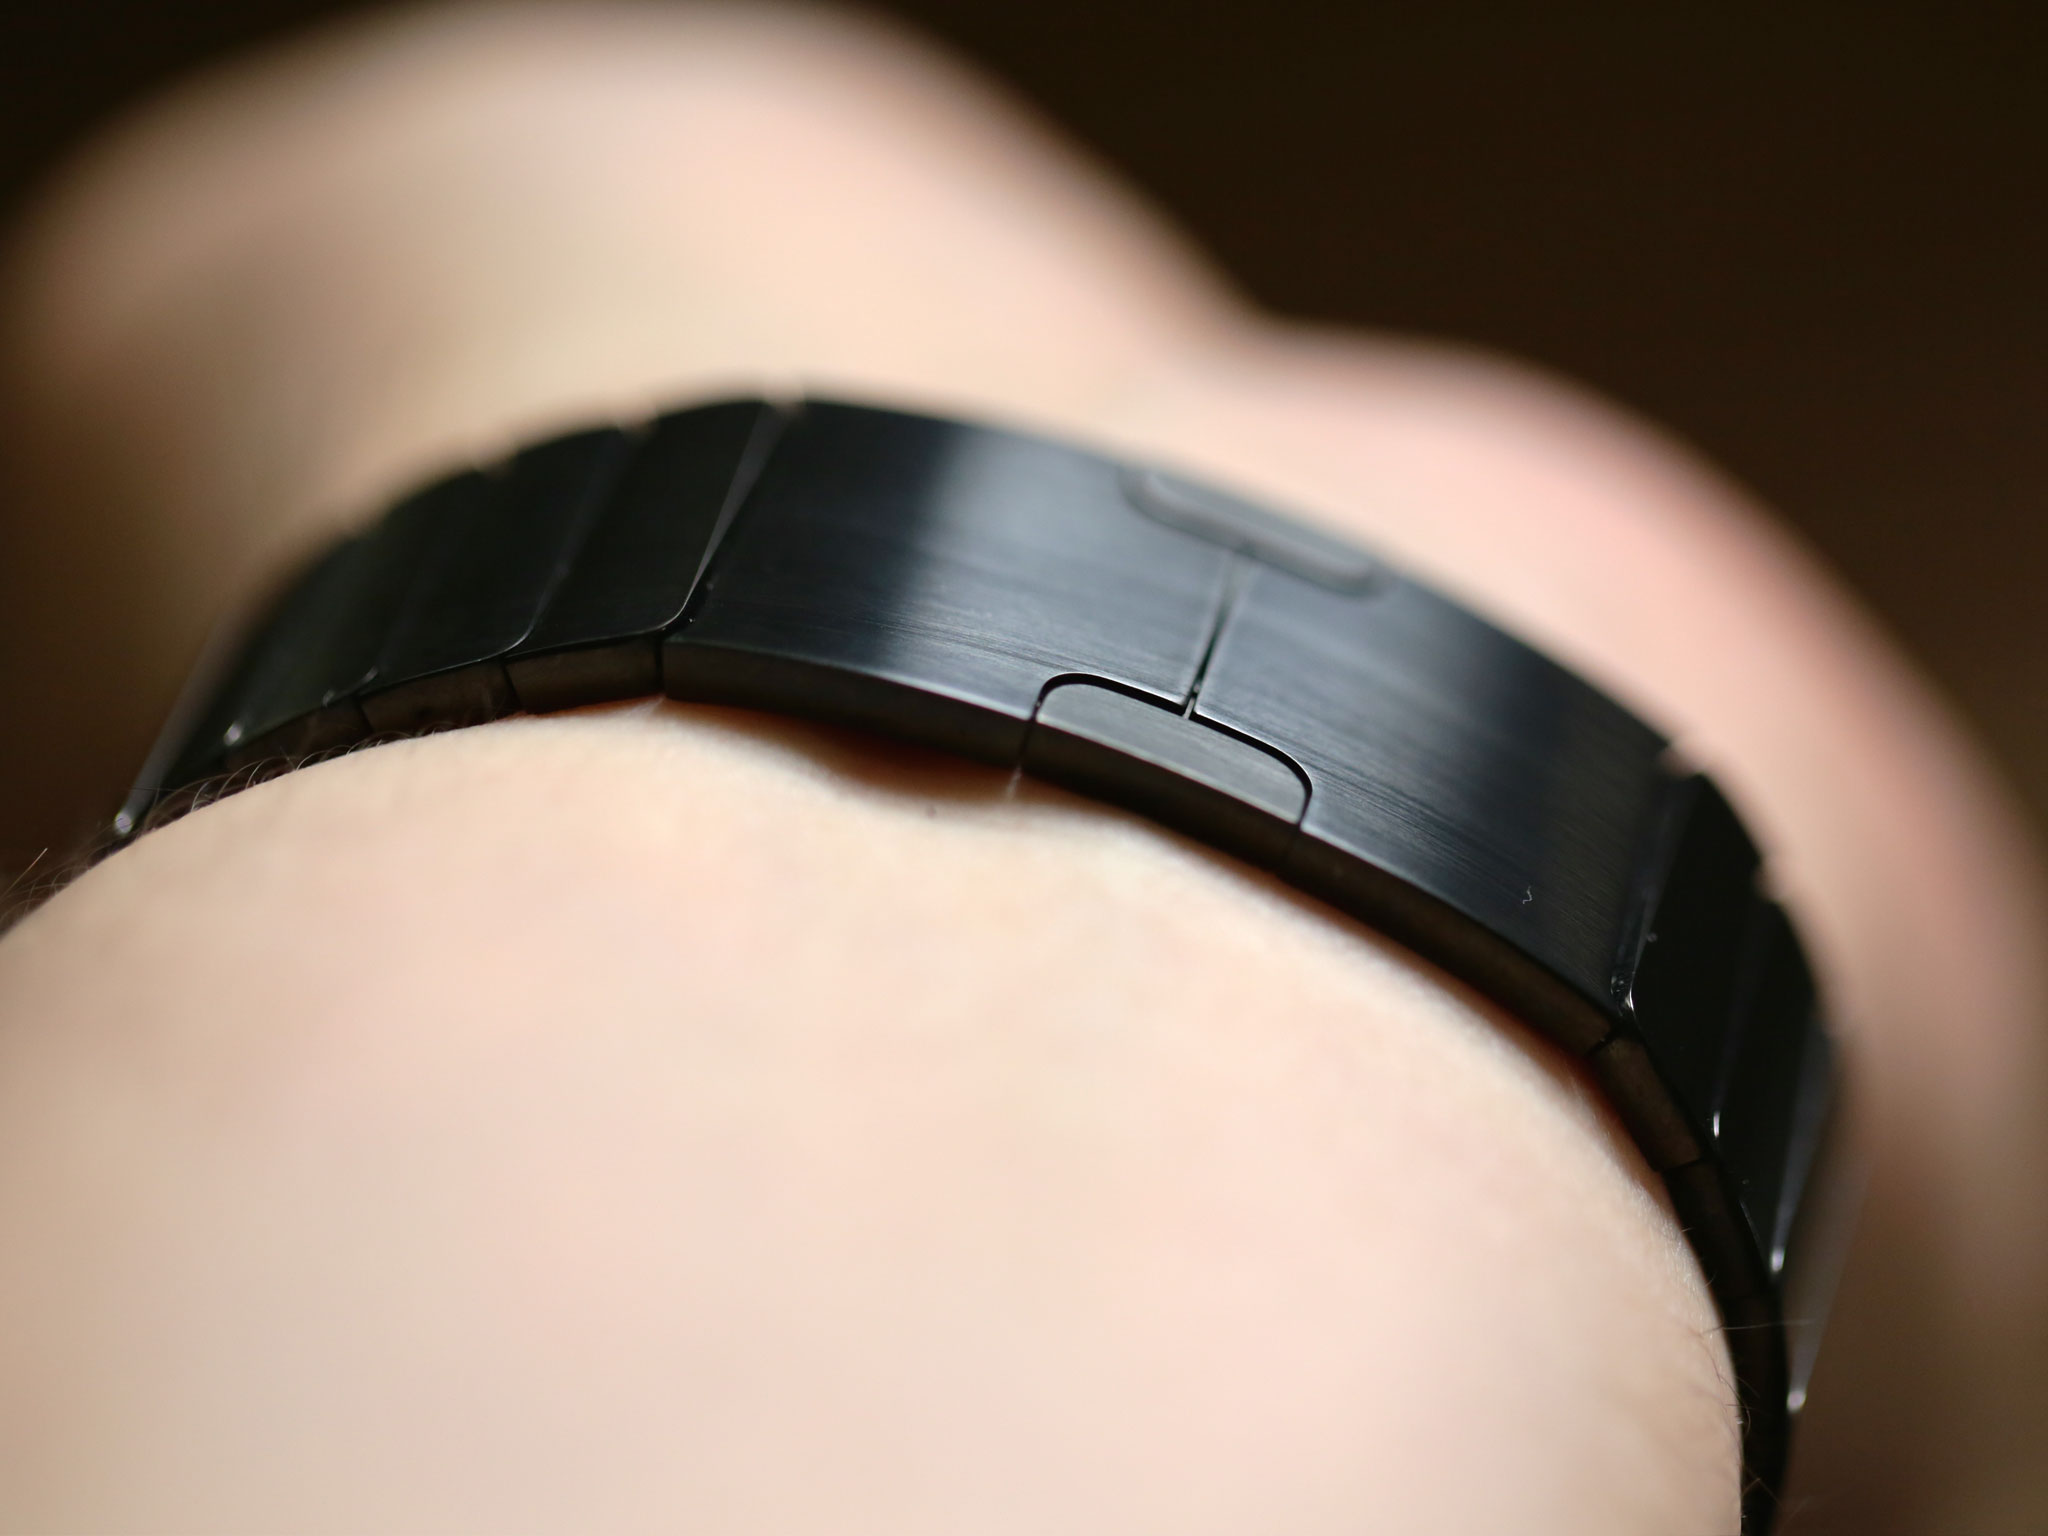 Link Bracelet band for Apple Watch review | iMore